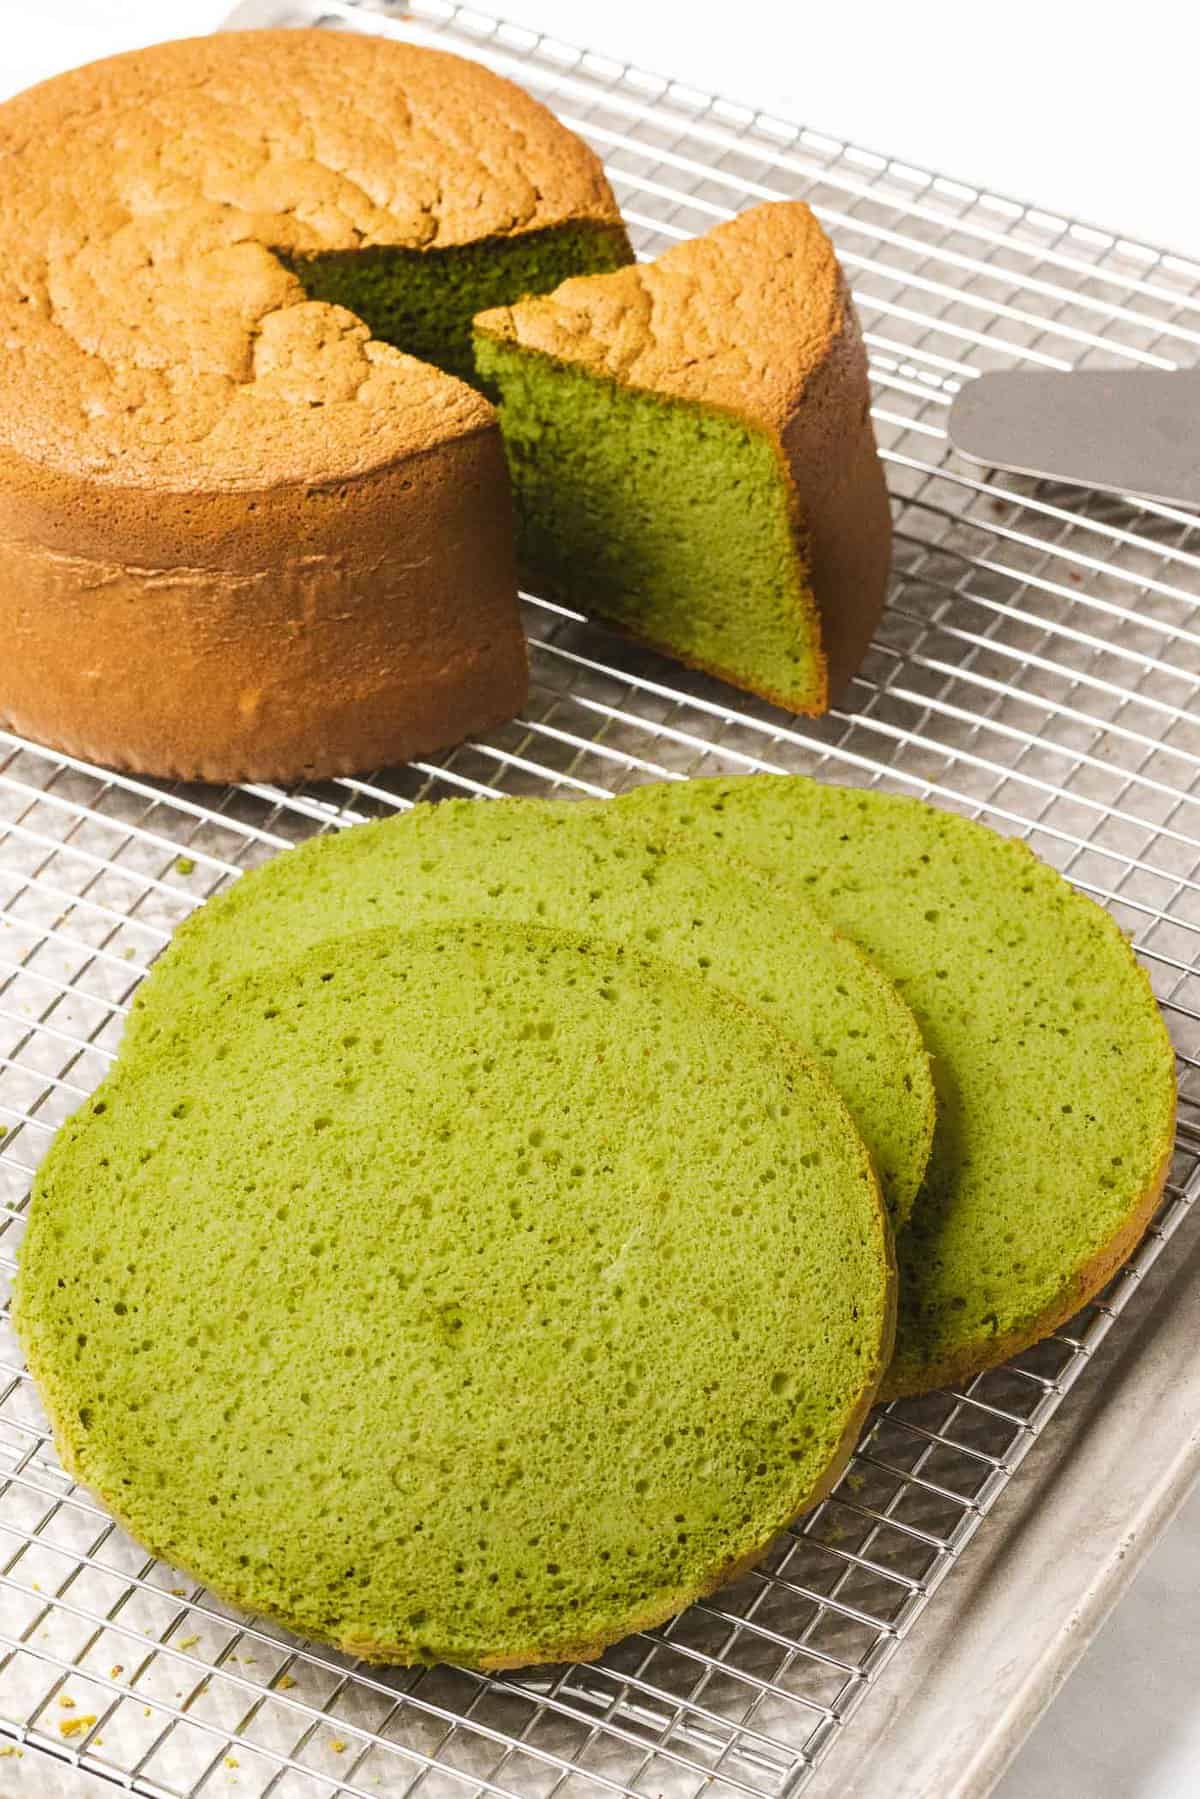 Matcha sponge cake with green interior cut into layers to show soft and fluffy texture.